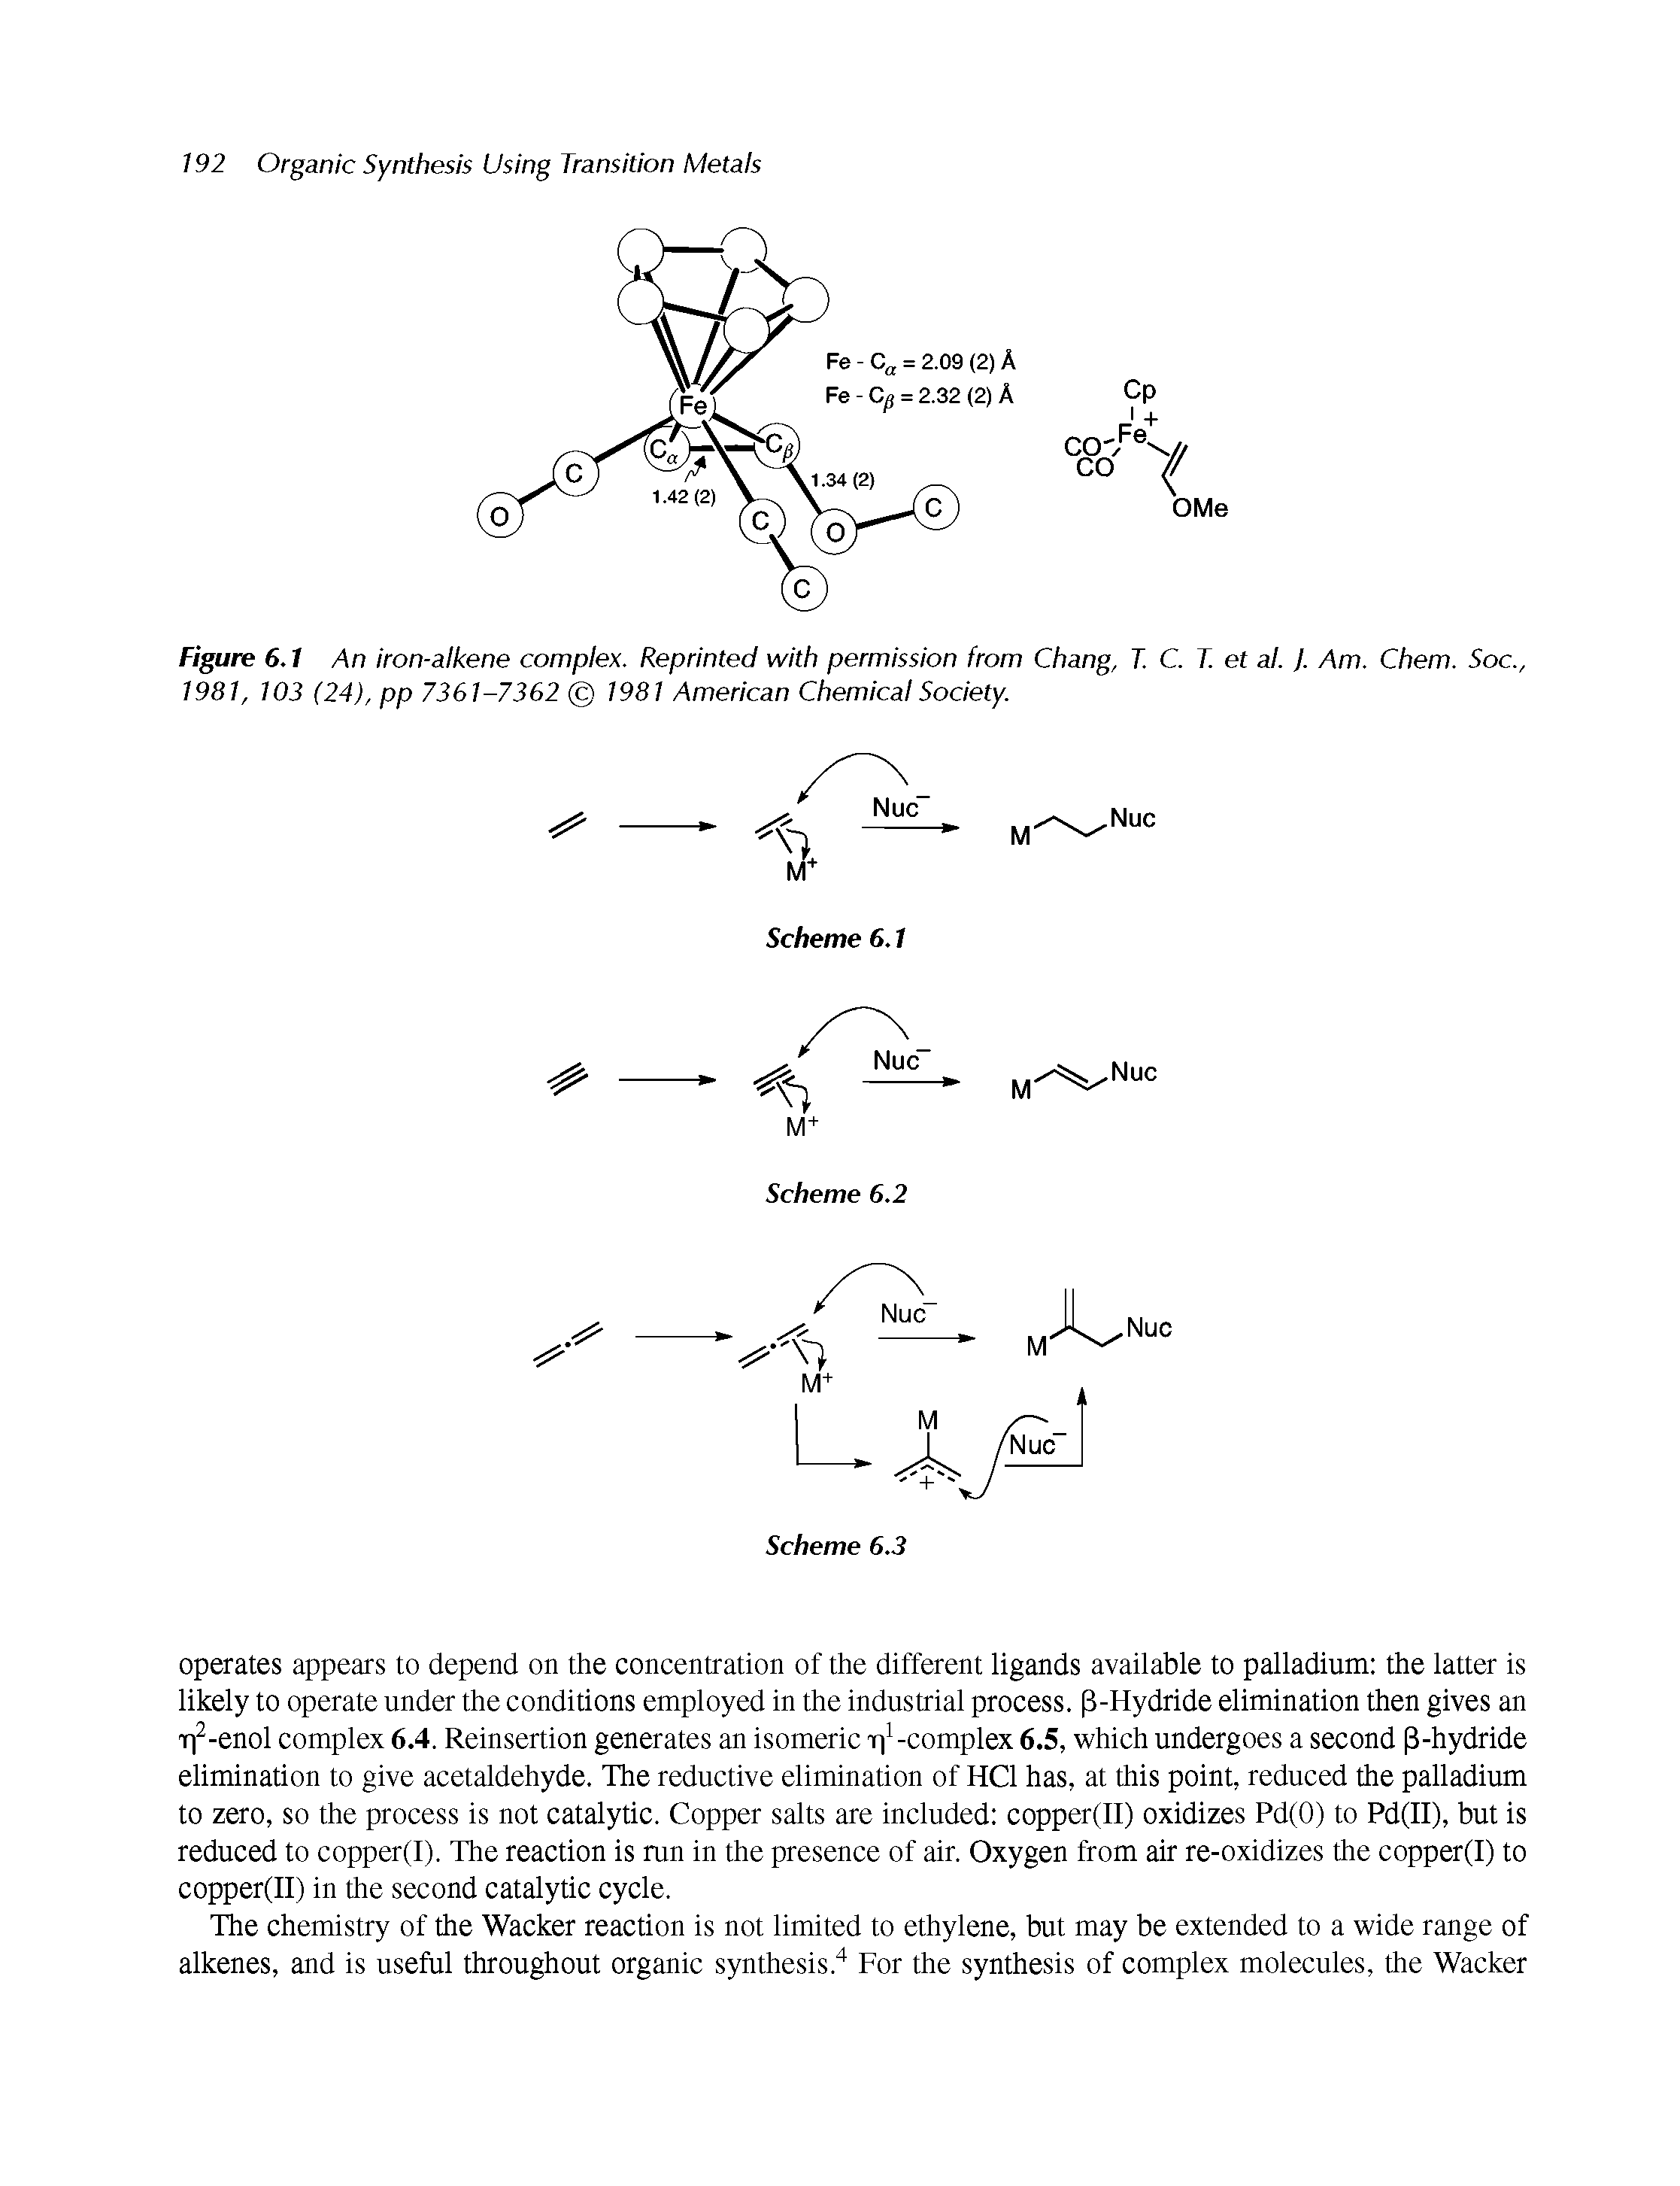 Figure 6.1 An iron-alkene complex. Reprinted with permission from Chang, T. C. T. et al. J. Am. Chem. Soc., 1981, 103 (24), pp 7361-7362 1981 American Chemical Society.